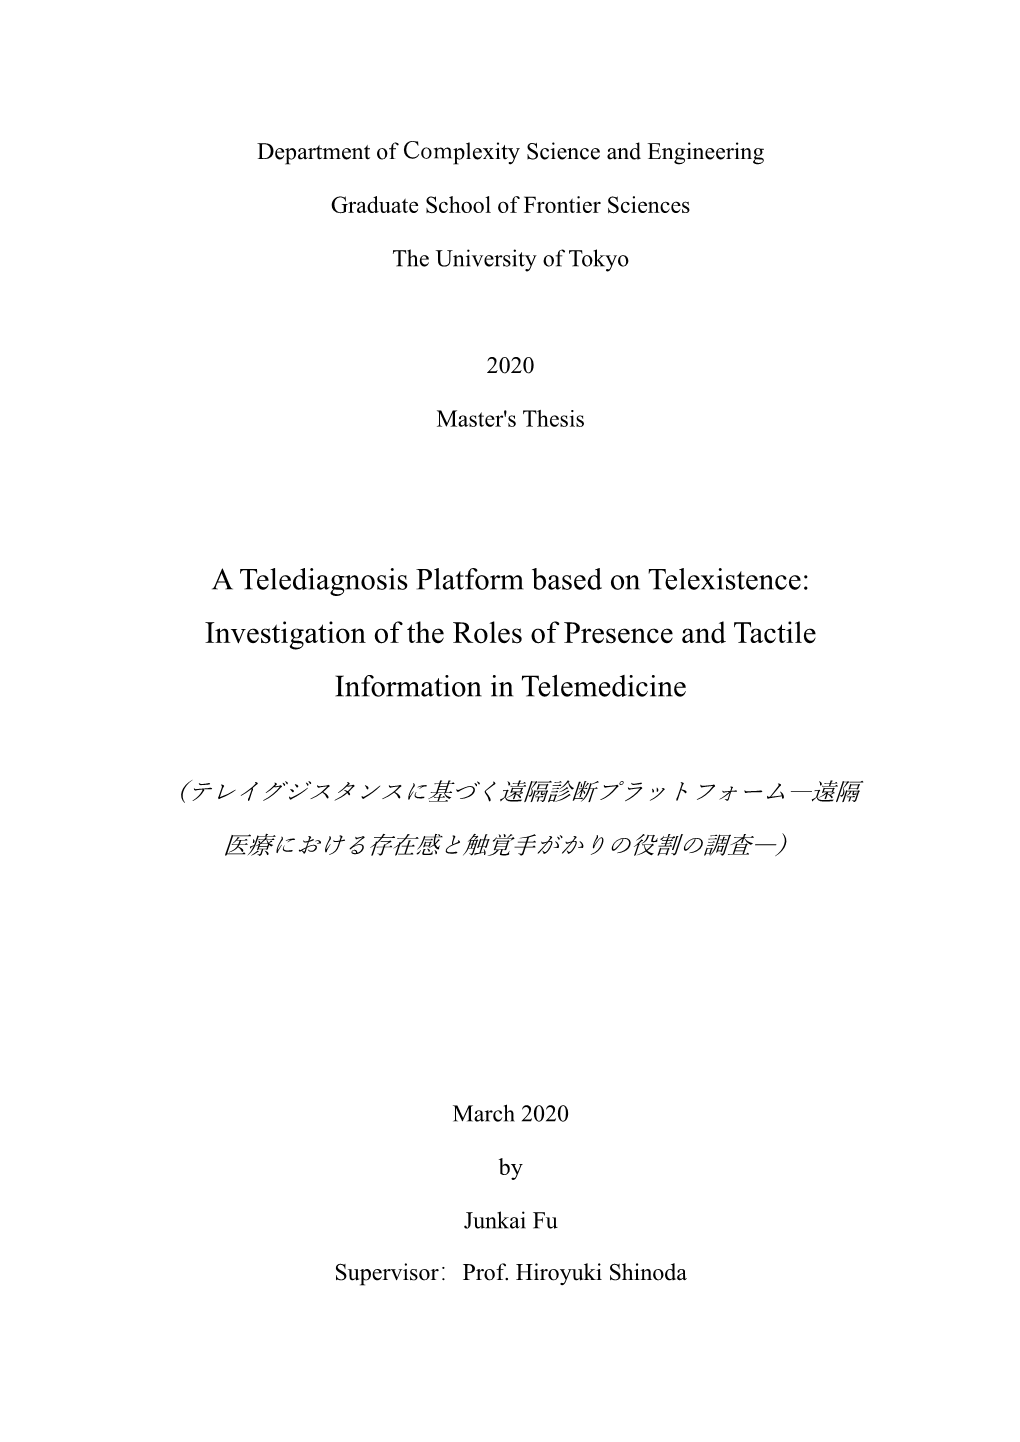 A Telediagnosis Platform Based on Telexistence: Investigation of the Roles of Presence and Tactile Information in Telemedicine